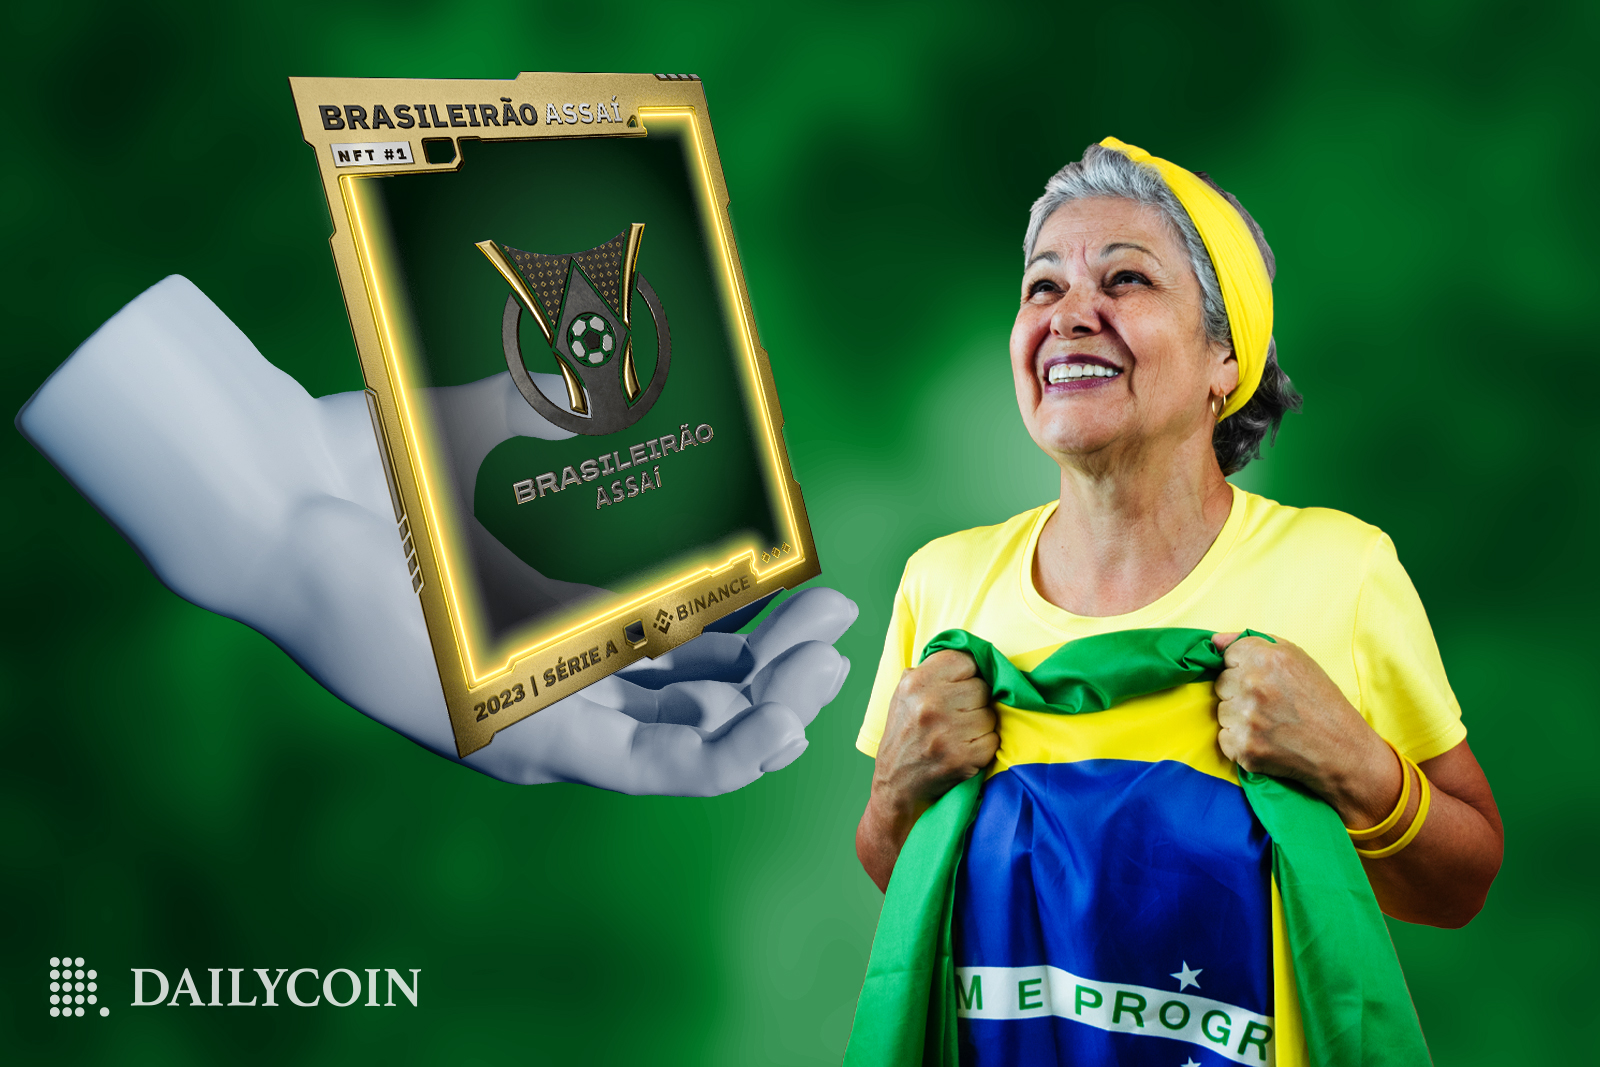 Happy Brazilian fan with the flag of Brazil in her hands is looking at the Binance free NFT collectible in a green background.